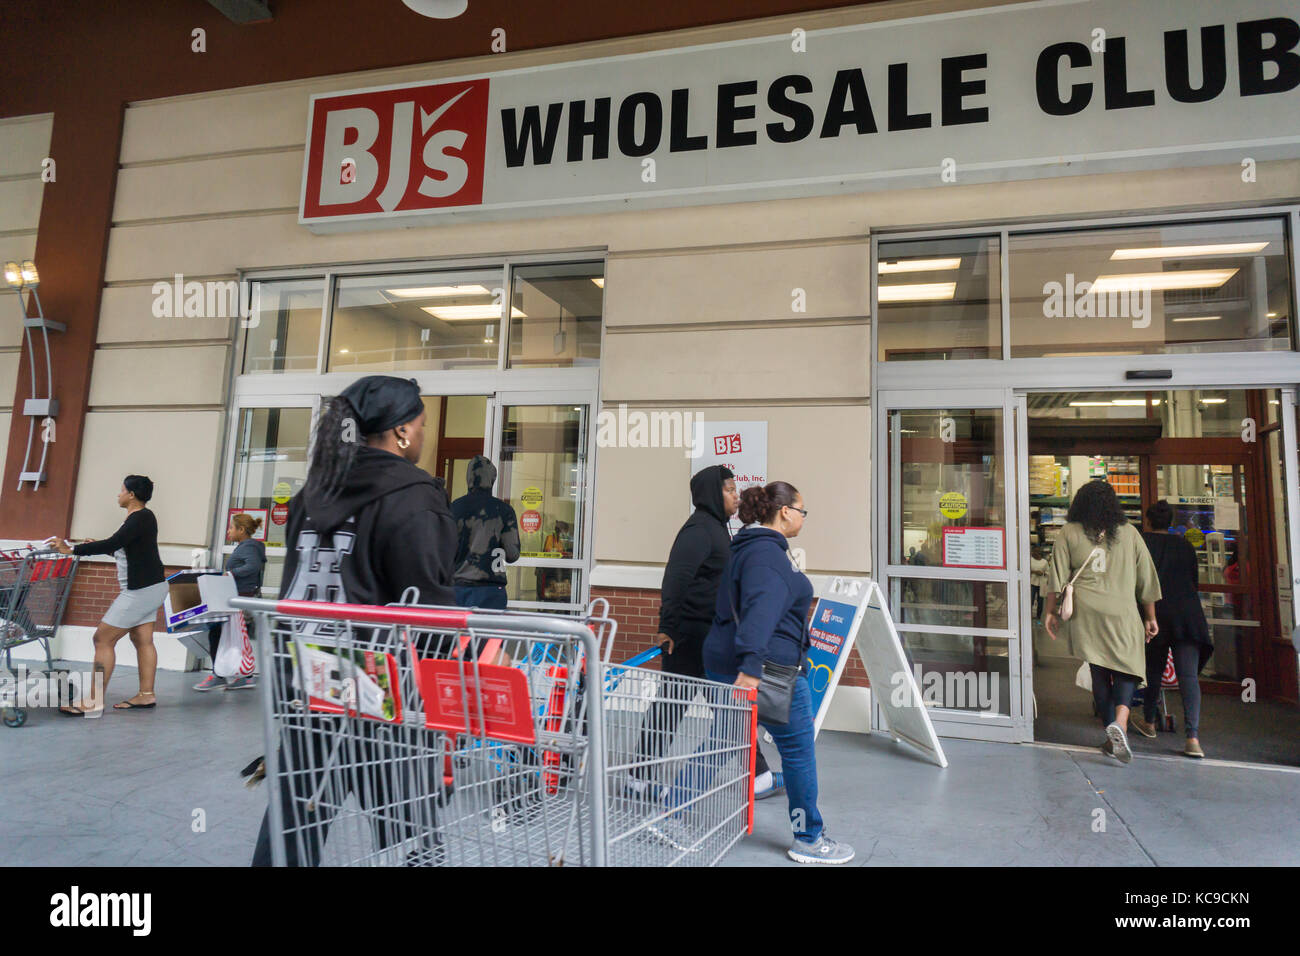 Shoppers at a BJ's Wholesale Club in a mall in the Bronx in New York on Saturday, September 30, 2017. CVC Capital Partners and Leonard Green & Partners, the owners of the buying club, are reported to be putting BJ's Wholesale Club on the block hoping to attract a buyer at $4 to 4.5 billion. (© Richard B. Levine) Stock Photo